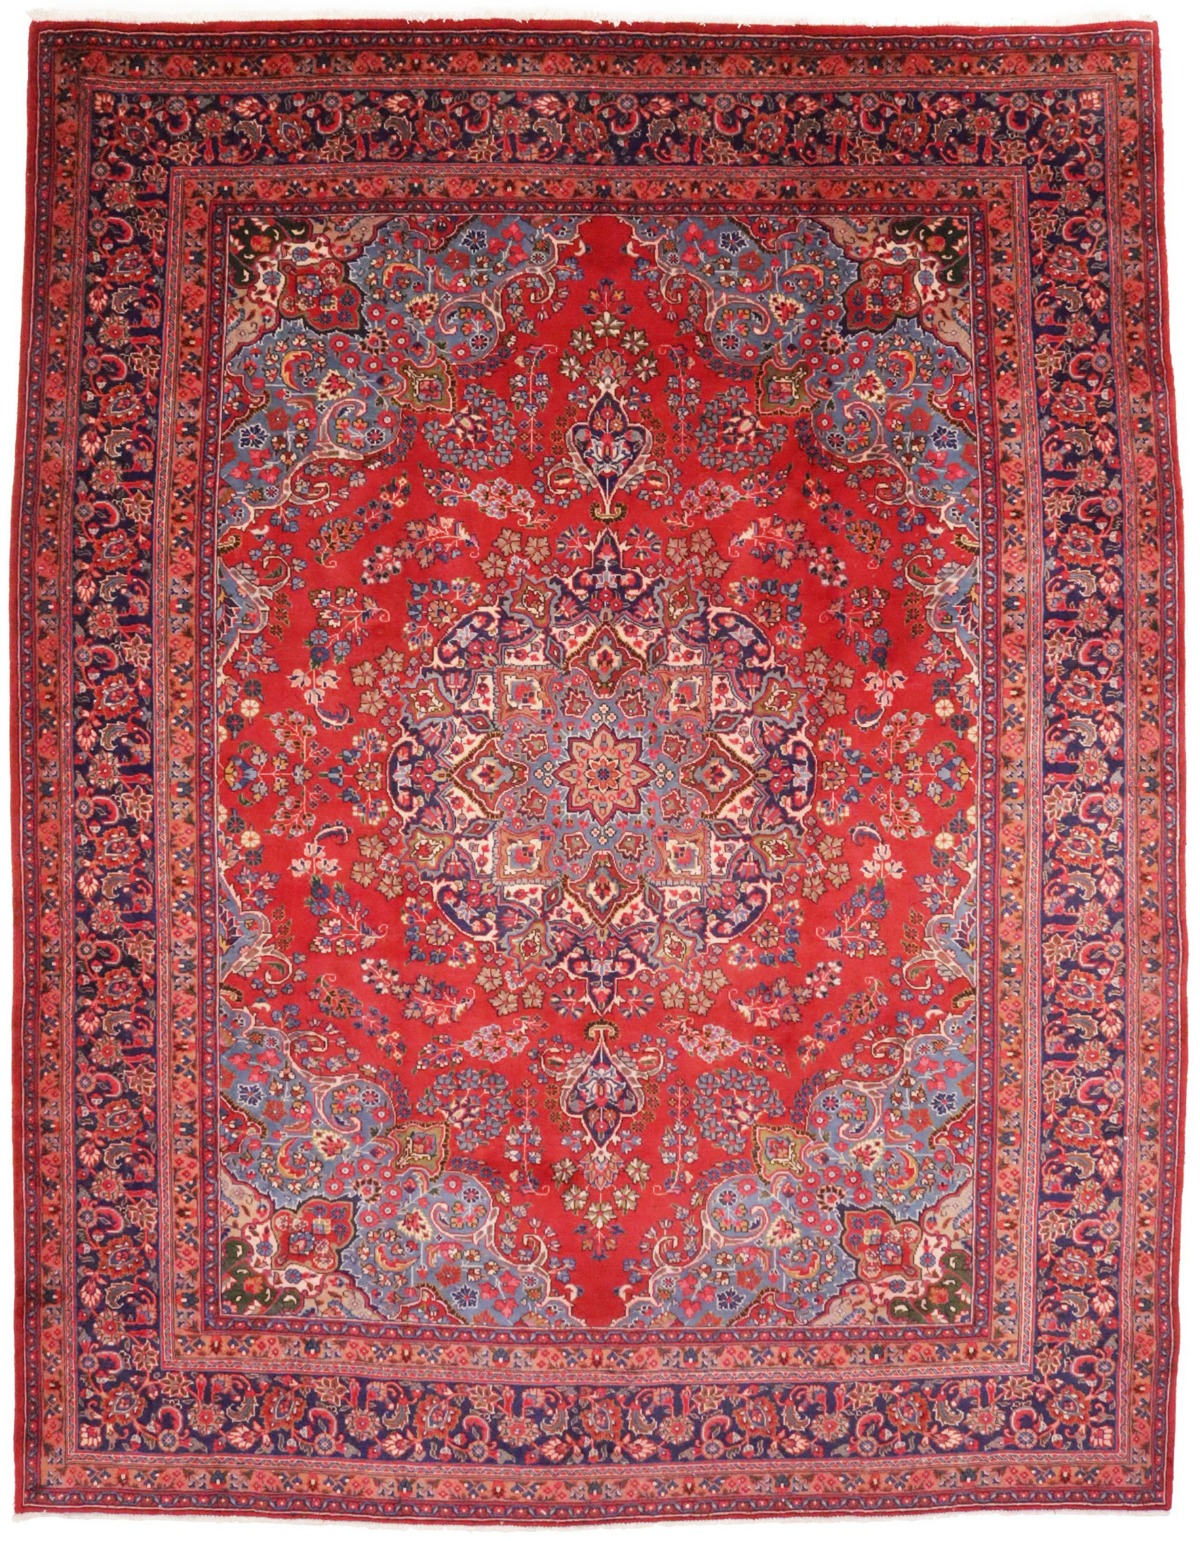 Vintage Cherry Red Traditional 10X13 Sabzevar Persian Rug